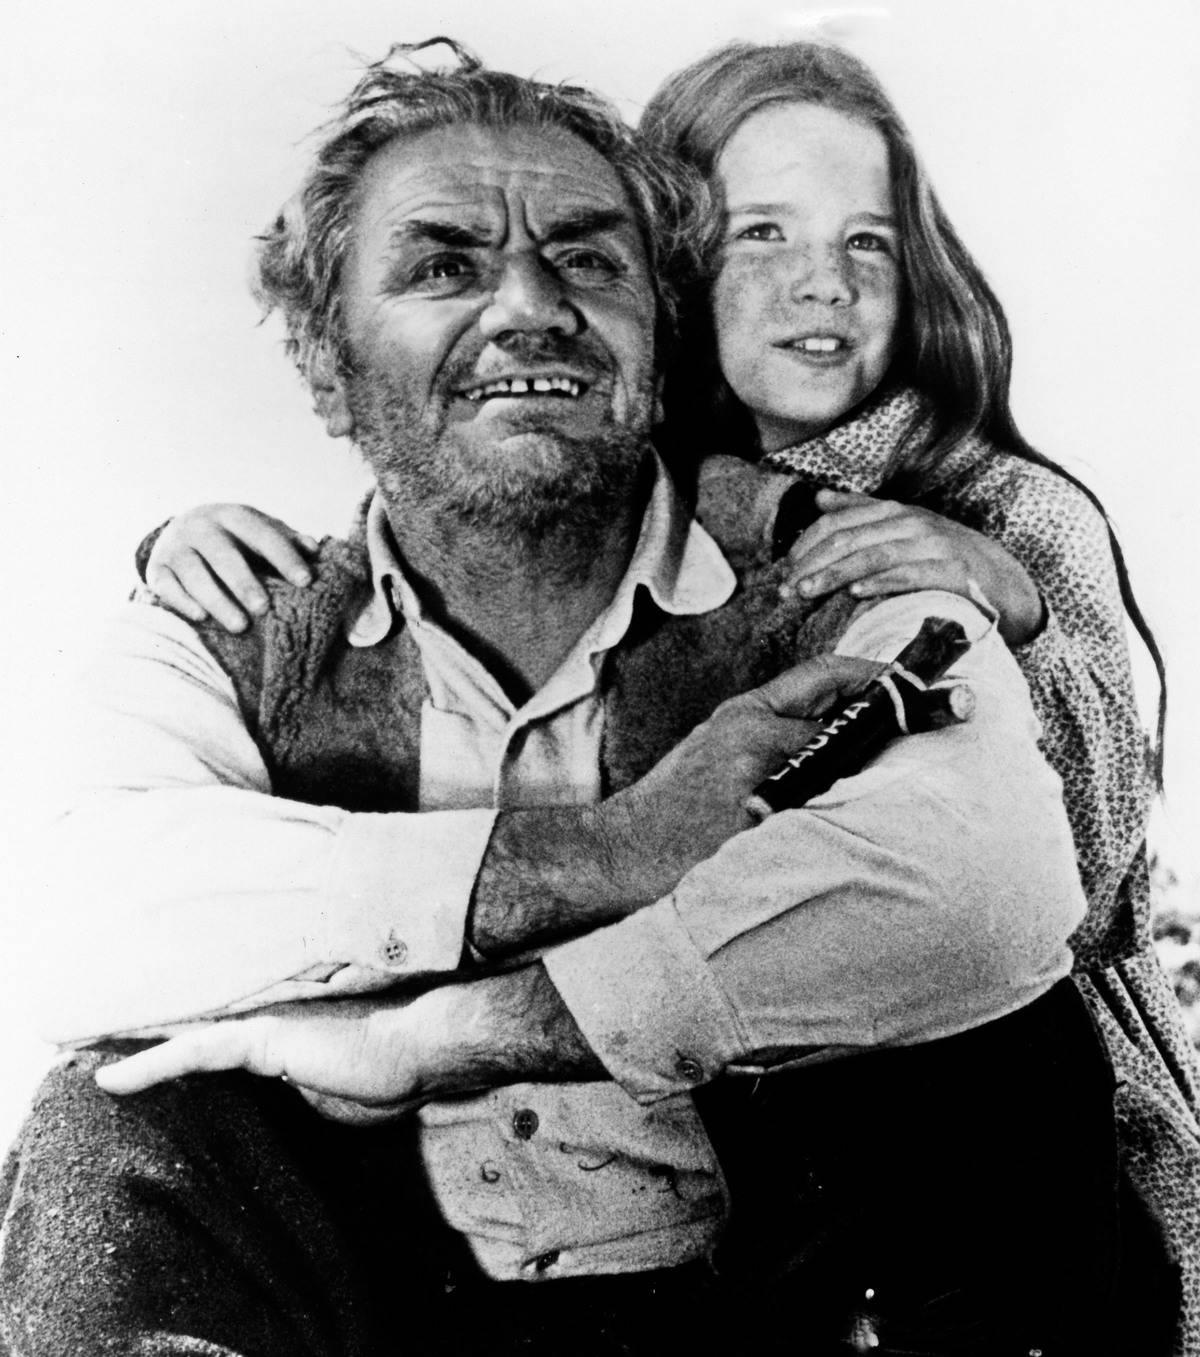 <p>The legendary Hollywood actor Ernest Borgnine made an appearance in a special two-part episode called "The Lord is My Shepherd." The episodes, from Season 1, originally aired in 1974.</p> <p>Borgnine played Jonathan, a mysterious spiritual guide to young Laura after her little brother dies. In her grief, she ran away to the mountains where she met the hermit, and together they made a wooden cross. The cross falls off and floats downstream, alerting Pa to Laura's location.</p>